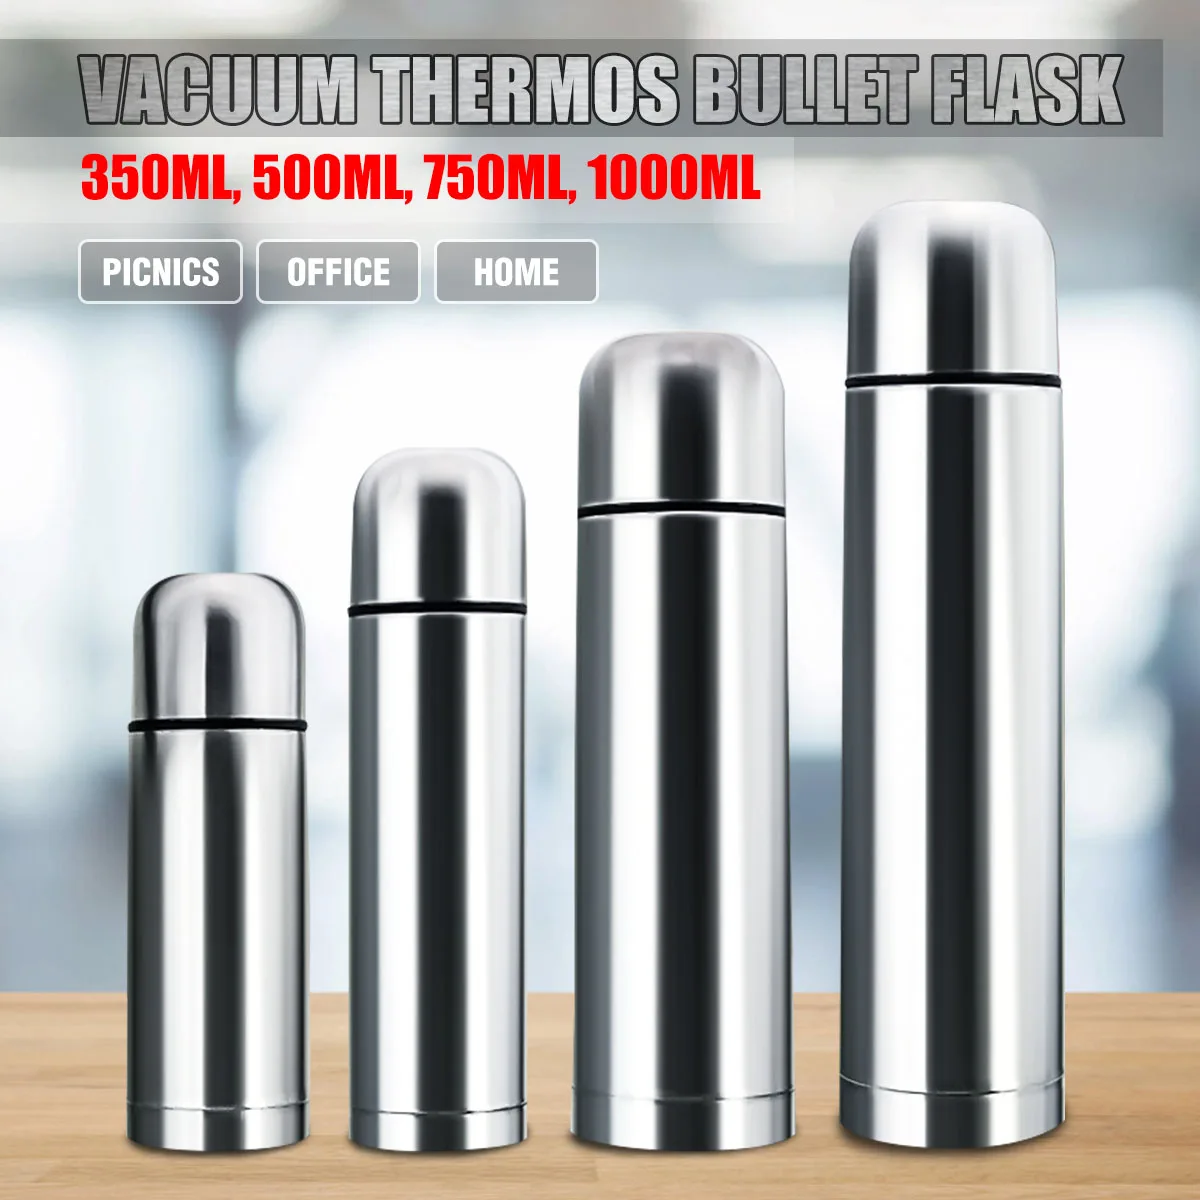 Details about   Stainless Steel Vacuum Thermos Bullet Flask HOT&COLD 